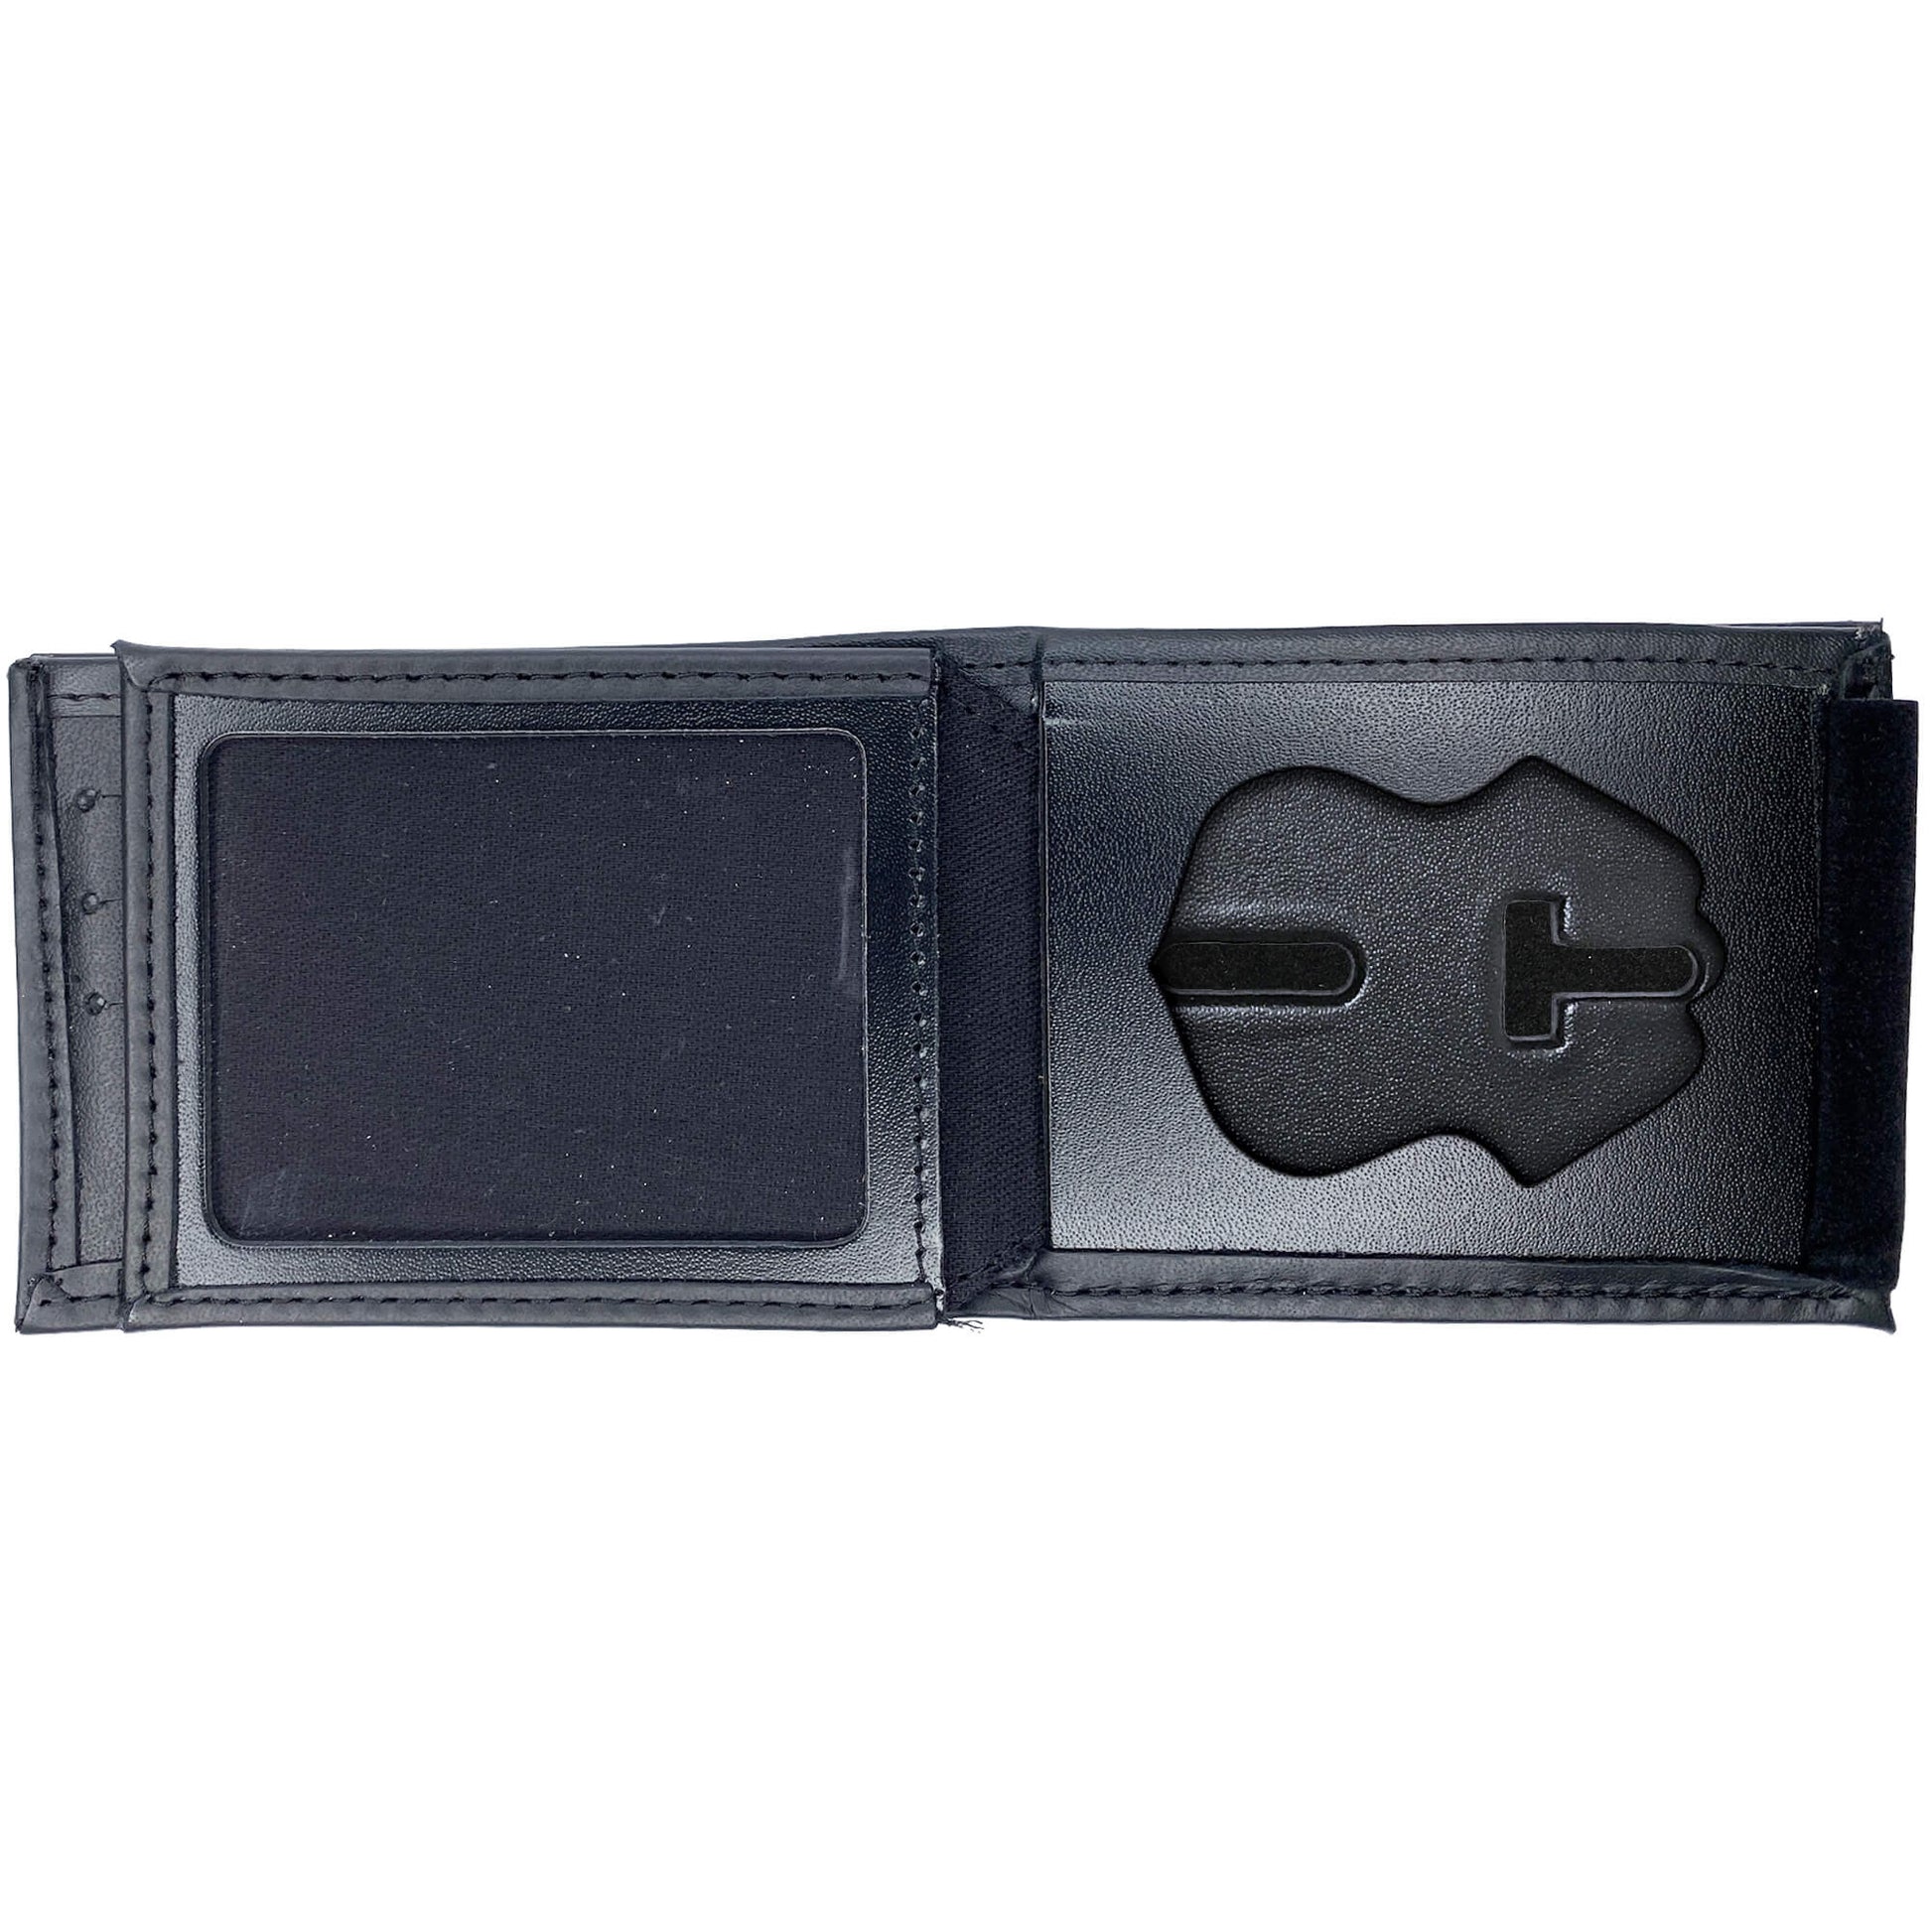 Bureau of Alcohol, Tobacco, Firearms and Explosives - ATF Horizontal Bifold Hidden Badge Wallet-Perfect Fit-911 Duty Gear USA